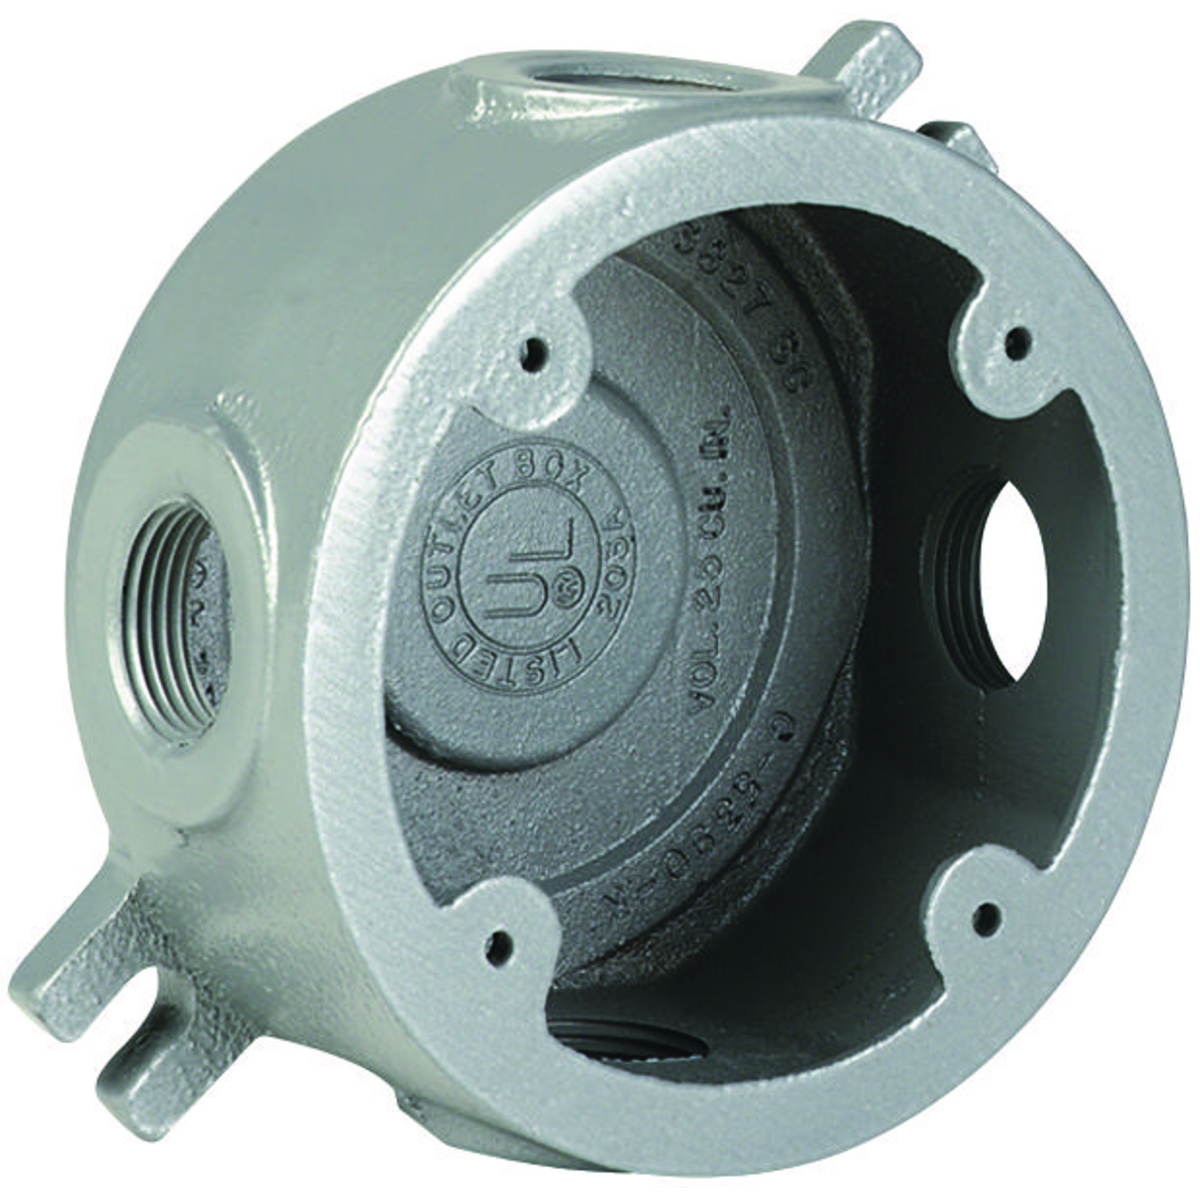 ROUND OUTLET 2-1/4" 1" HUB